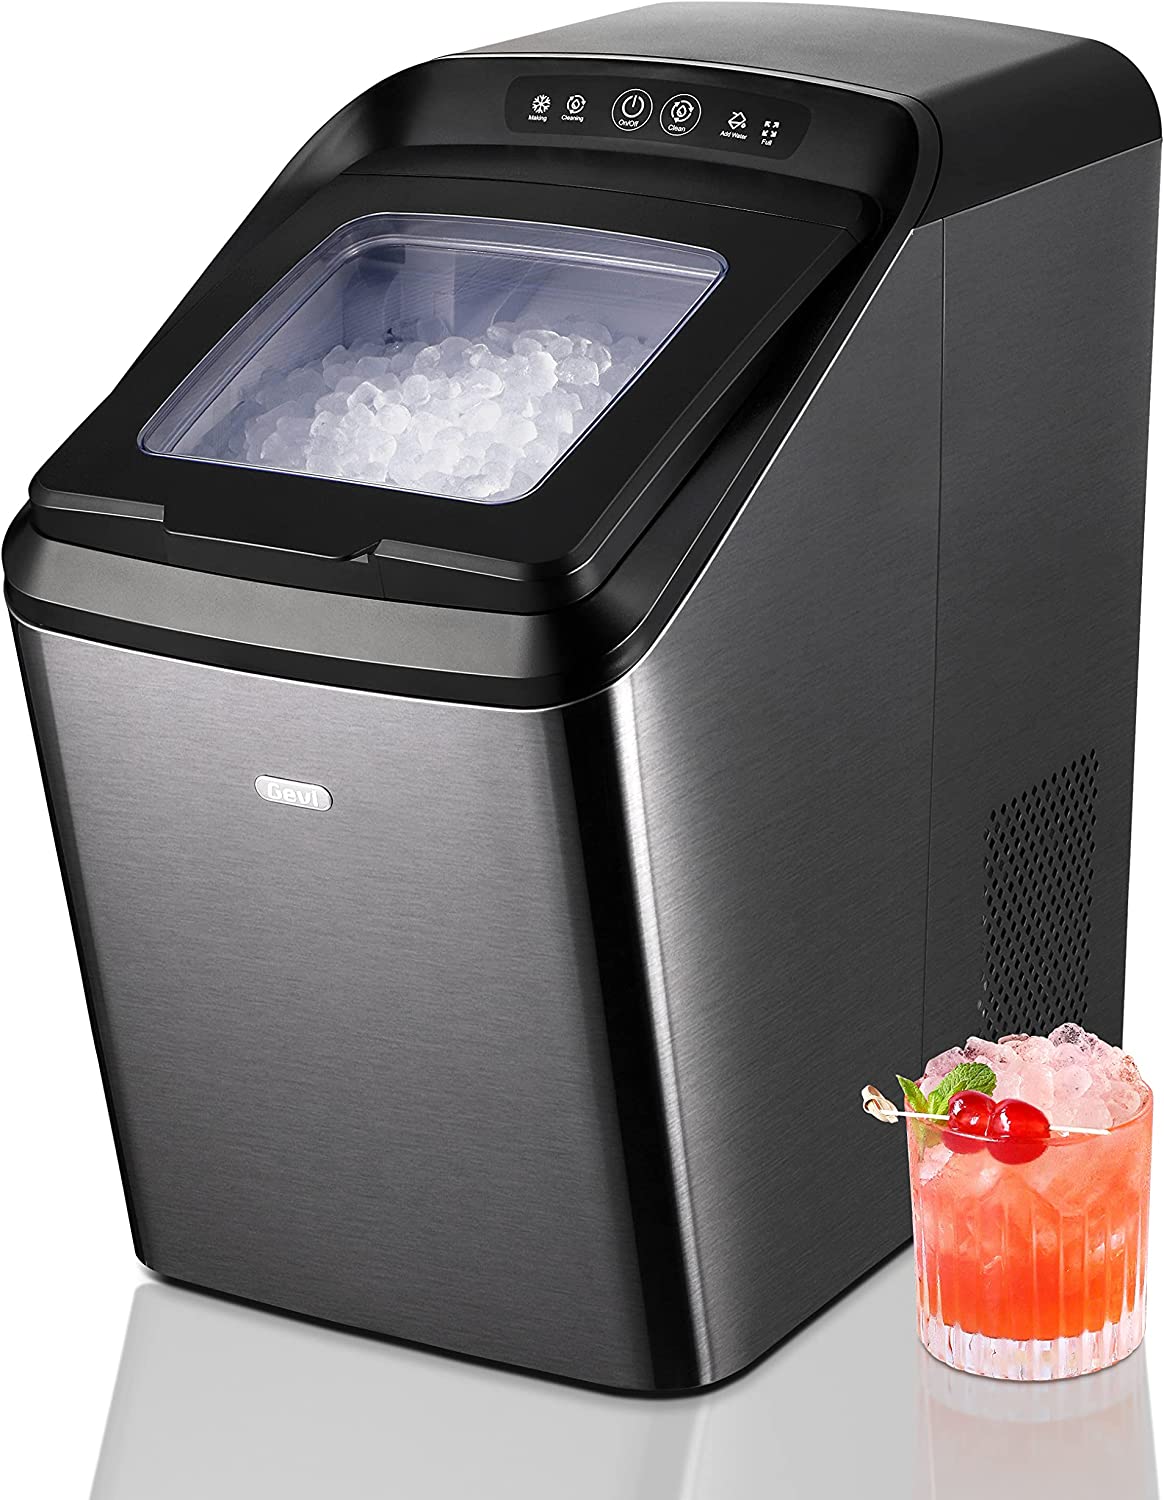 Gevi Household Nugget Ice Maker, dorchesterpaws